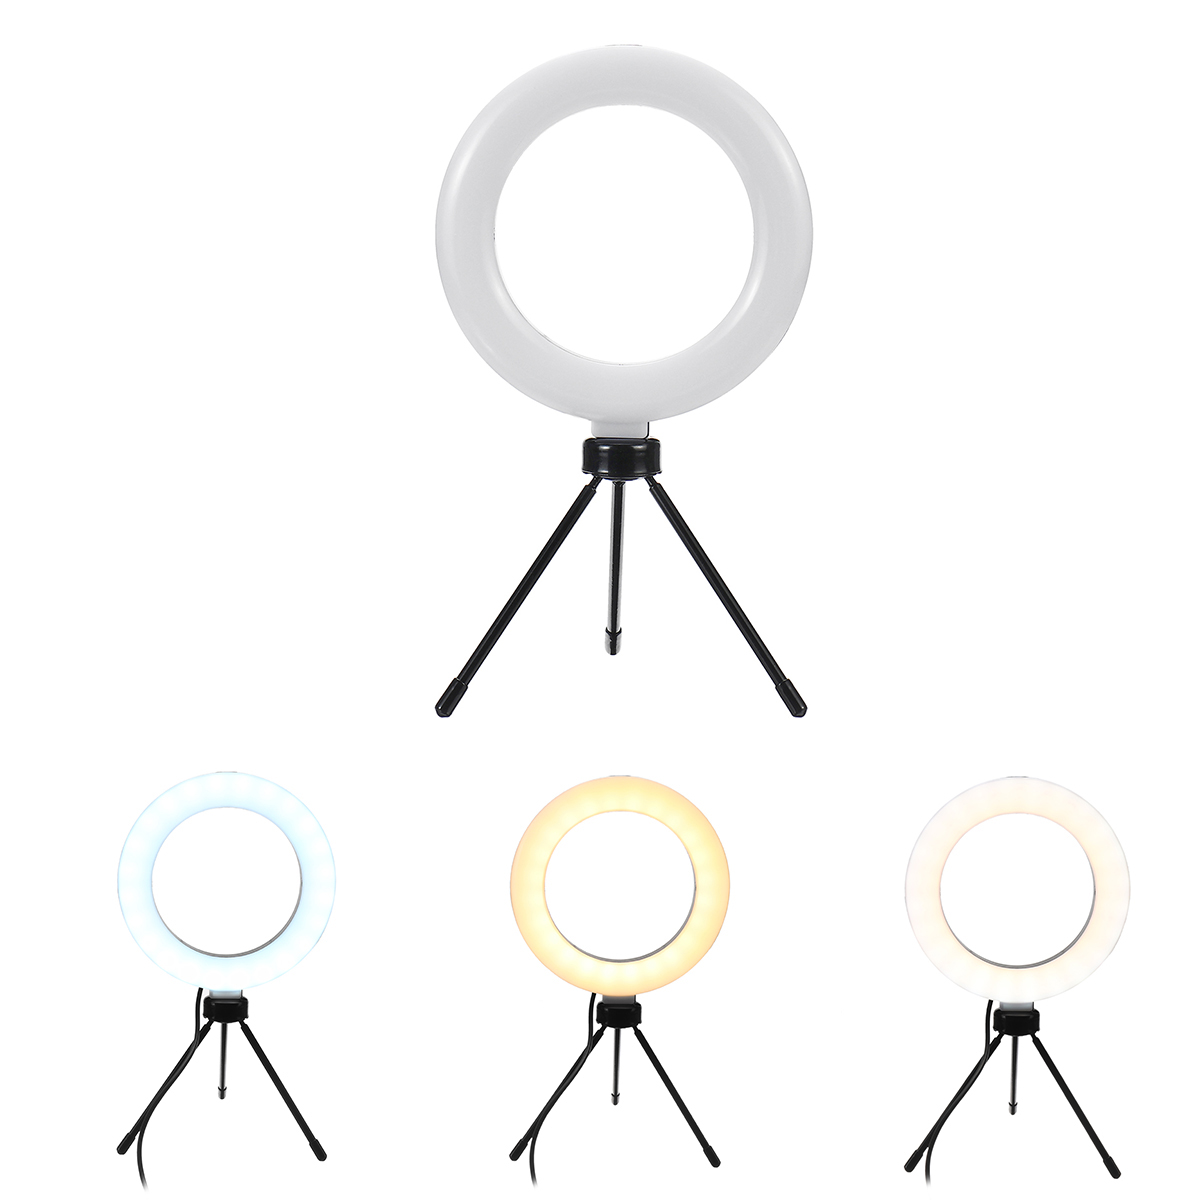 Photography-LED-Mirrors-Selfie-Ring-Light-260MM-Dimmable-Camera-Phone-Lamp-Fill-Light-with-Table-Tri-1632273-3